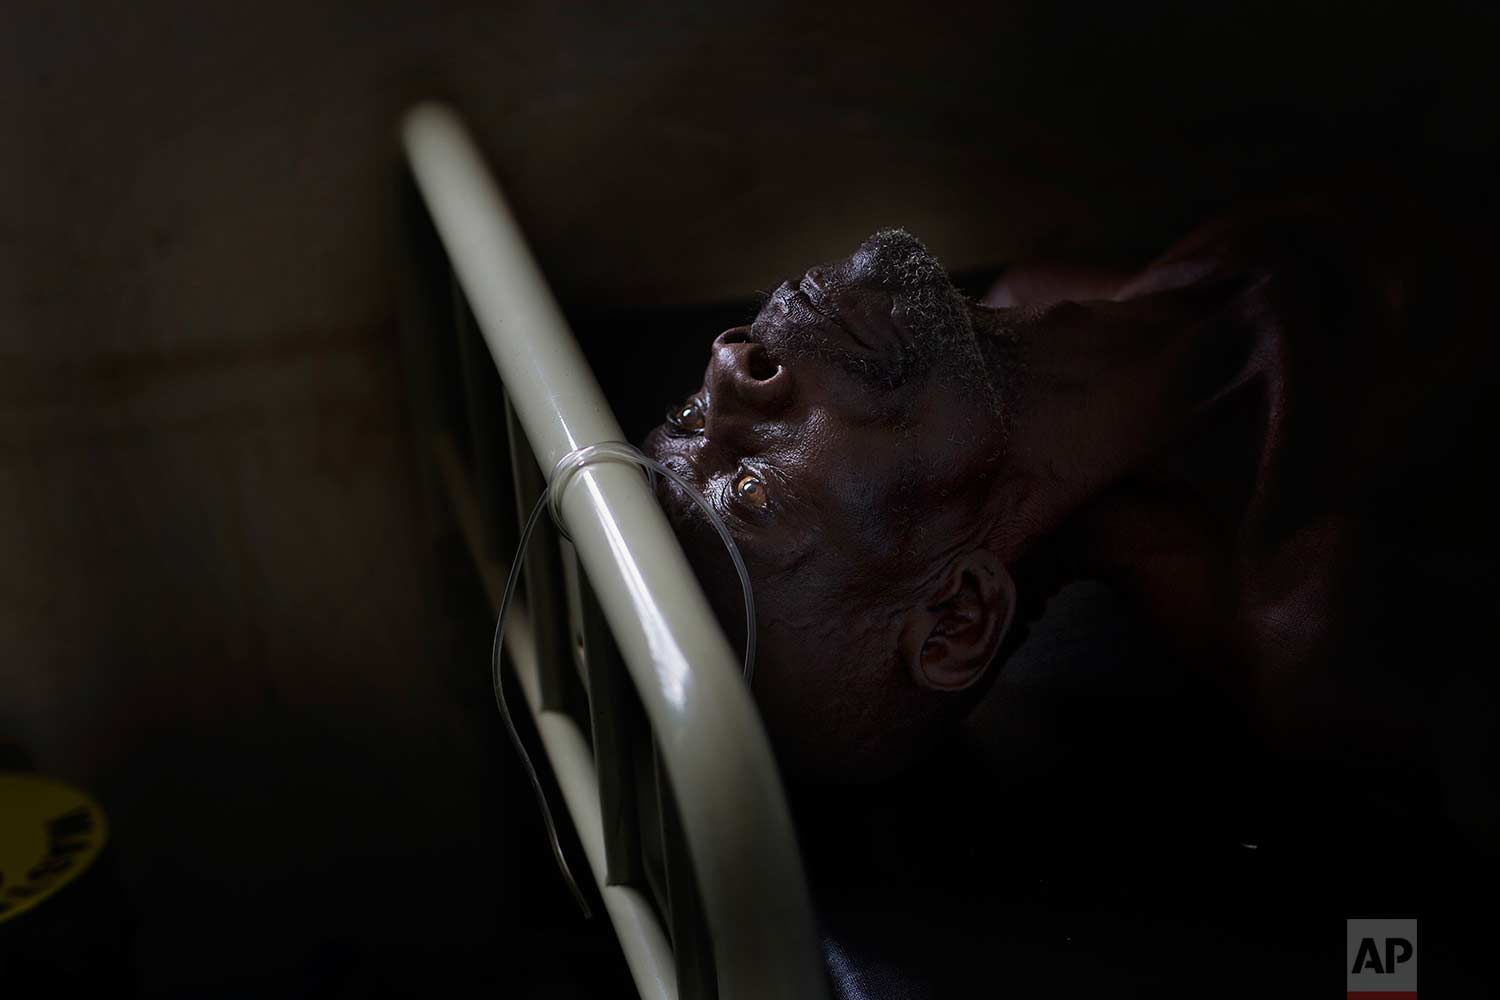  In this Monday, April 3, 2017 photo, Alfred Wani lays on a bed in the clinic at the Imvepi refugee settlement in northern Uganda. Alfred fell ill during the night and had to have blood drawn. (AP Photo/Jerome Delay) 